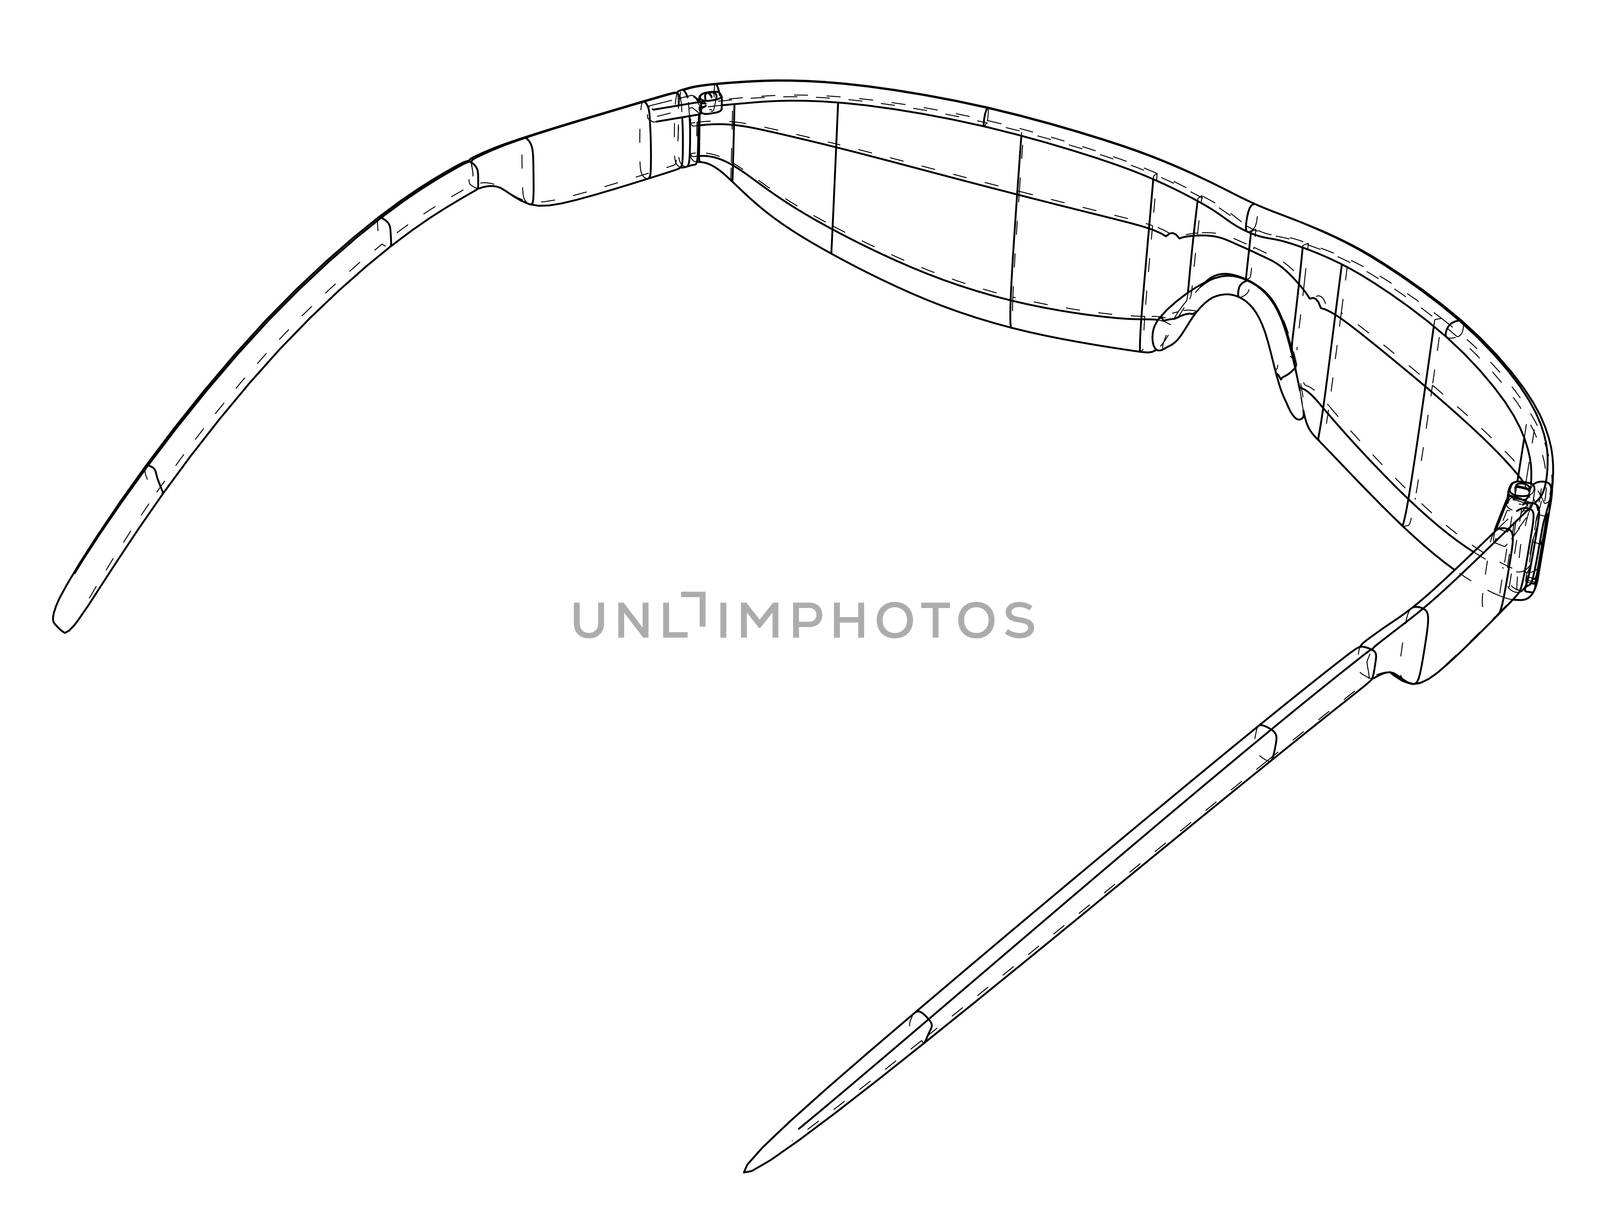 VR Virtual Reality Glasses Concept. 3d illustration. Wire-frame style